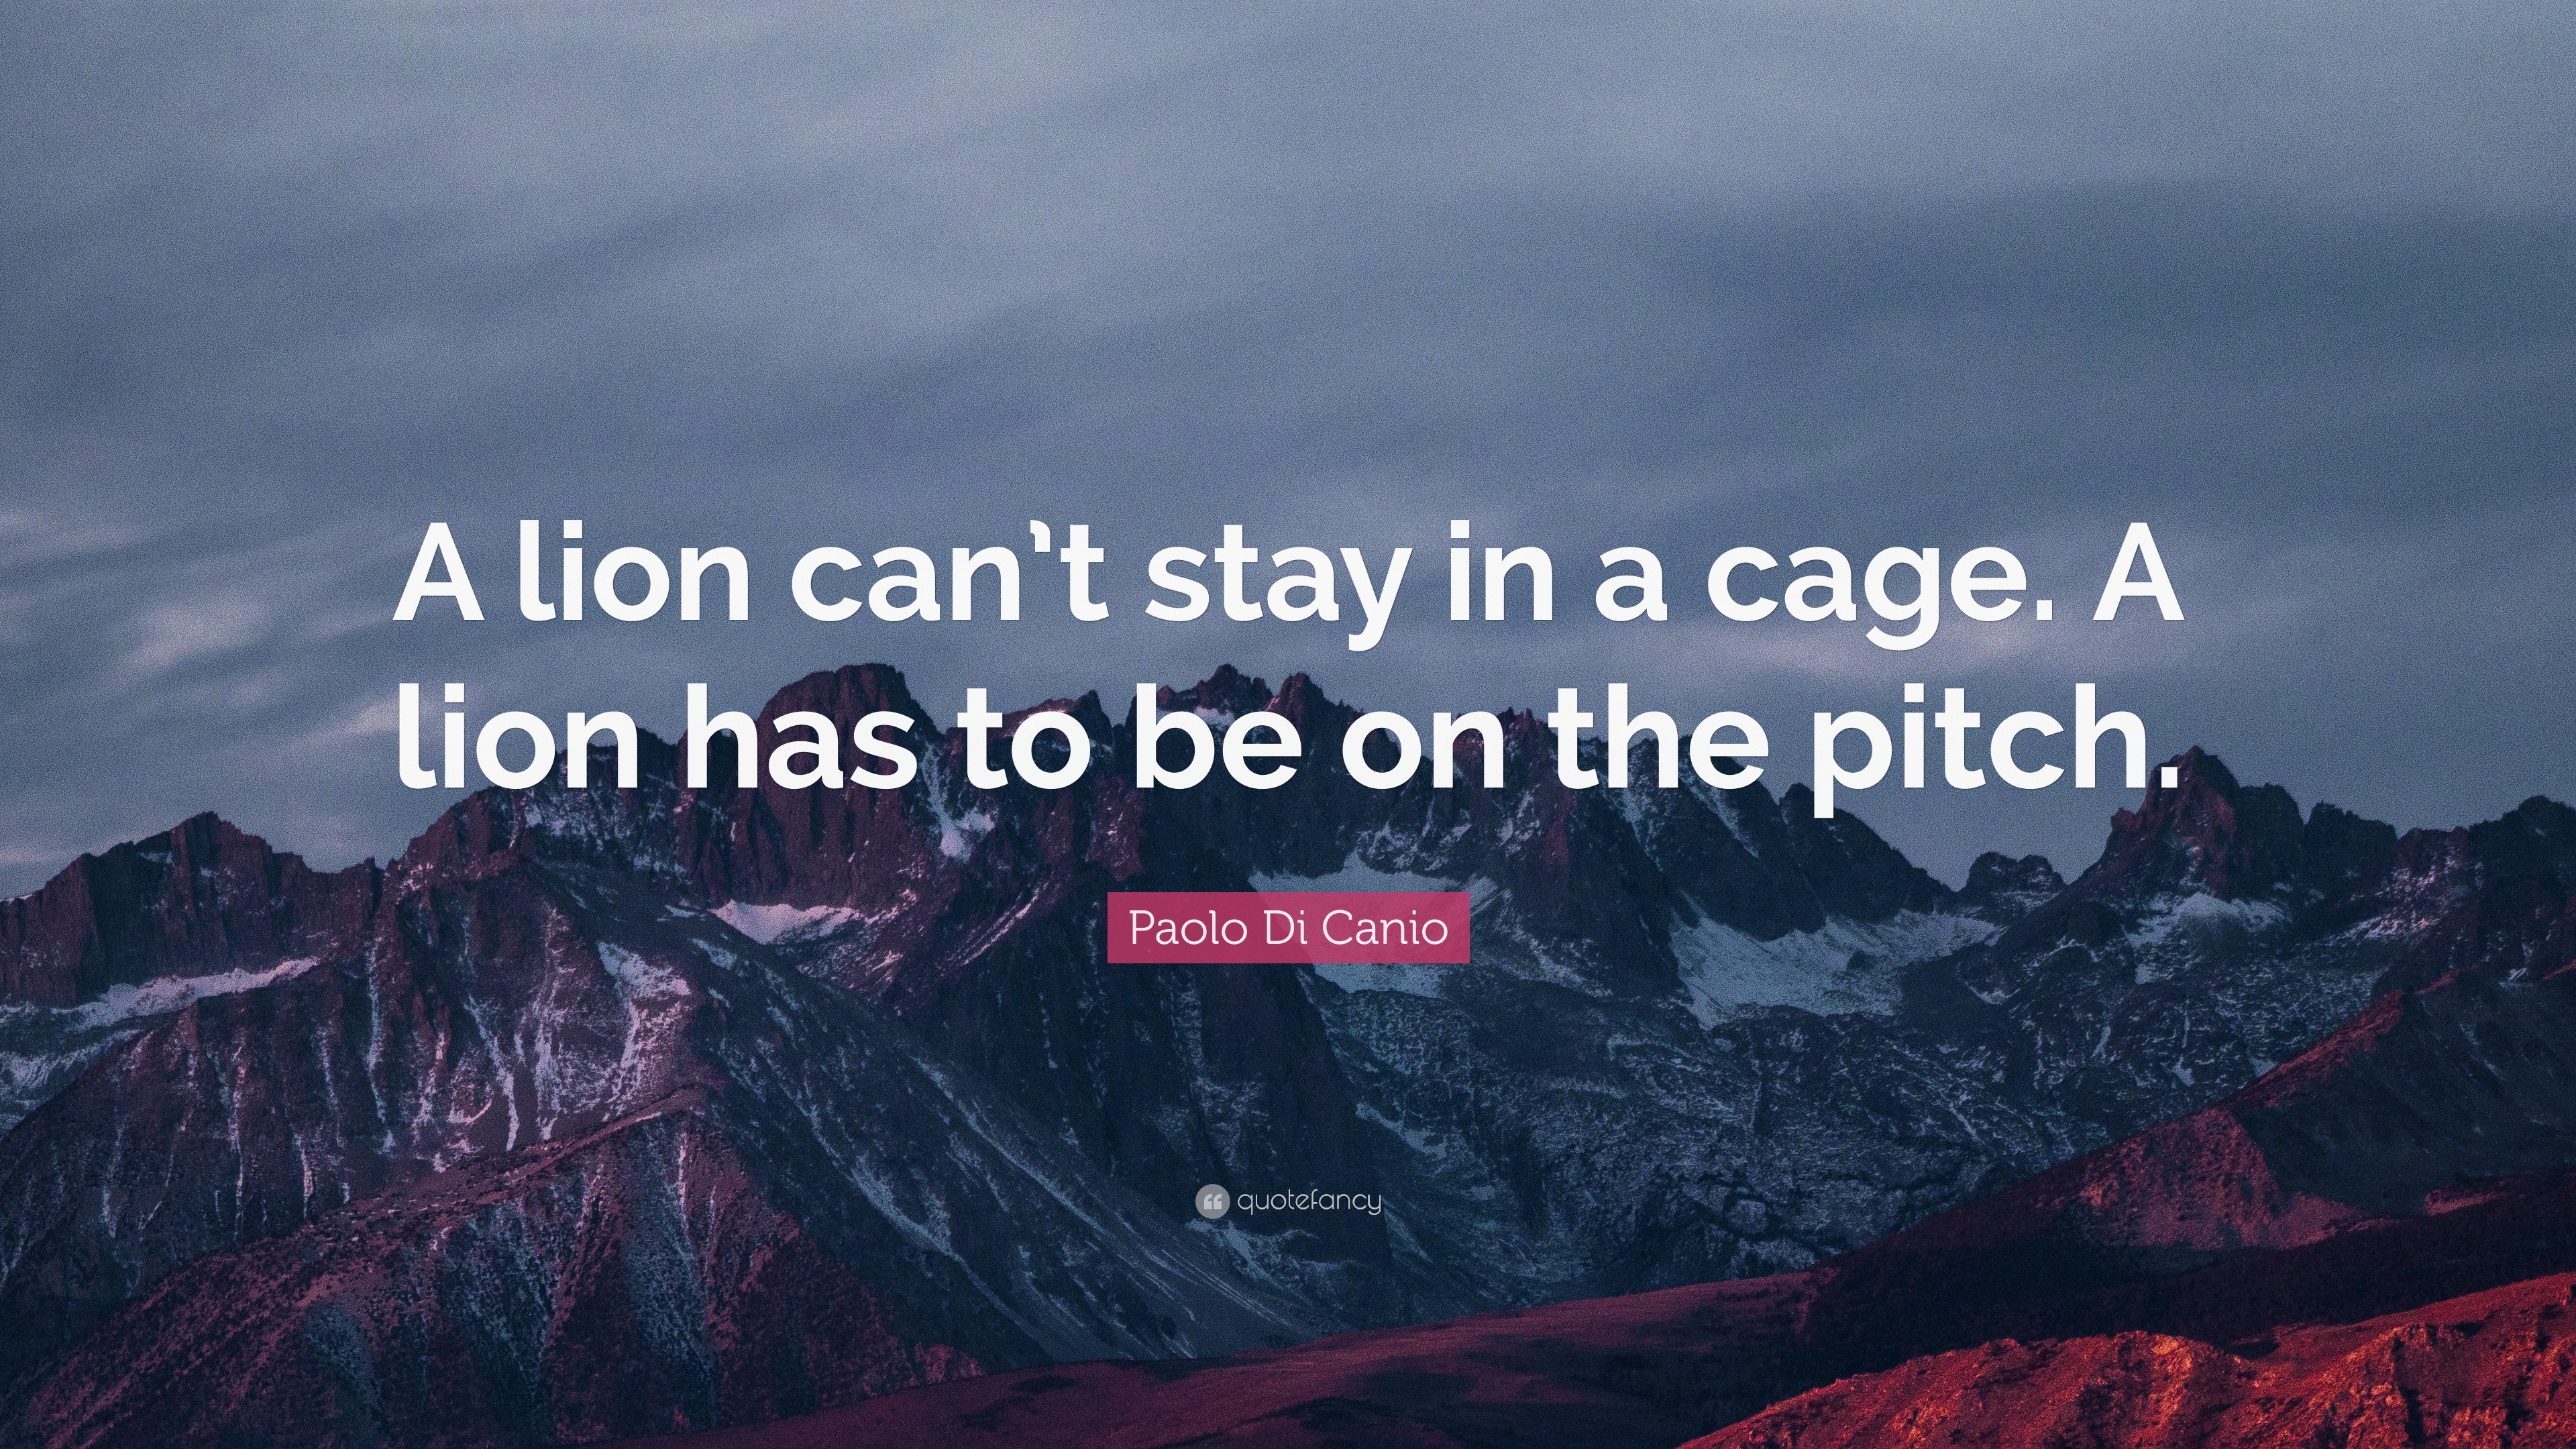 Top 10 Paolo Di Canio Quotes (2023 Update) - Quotefancy